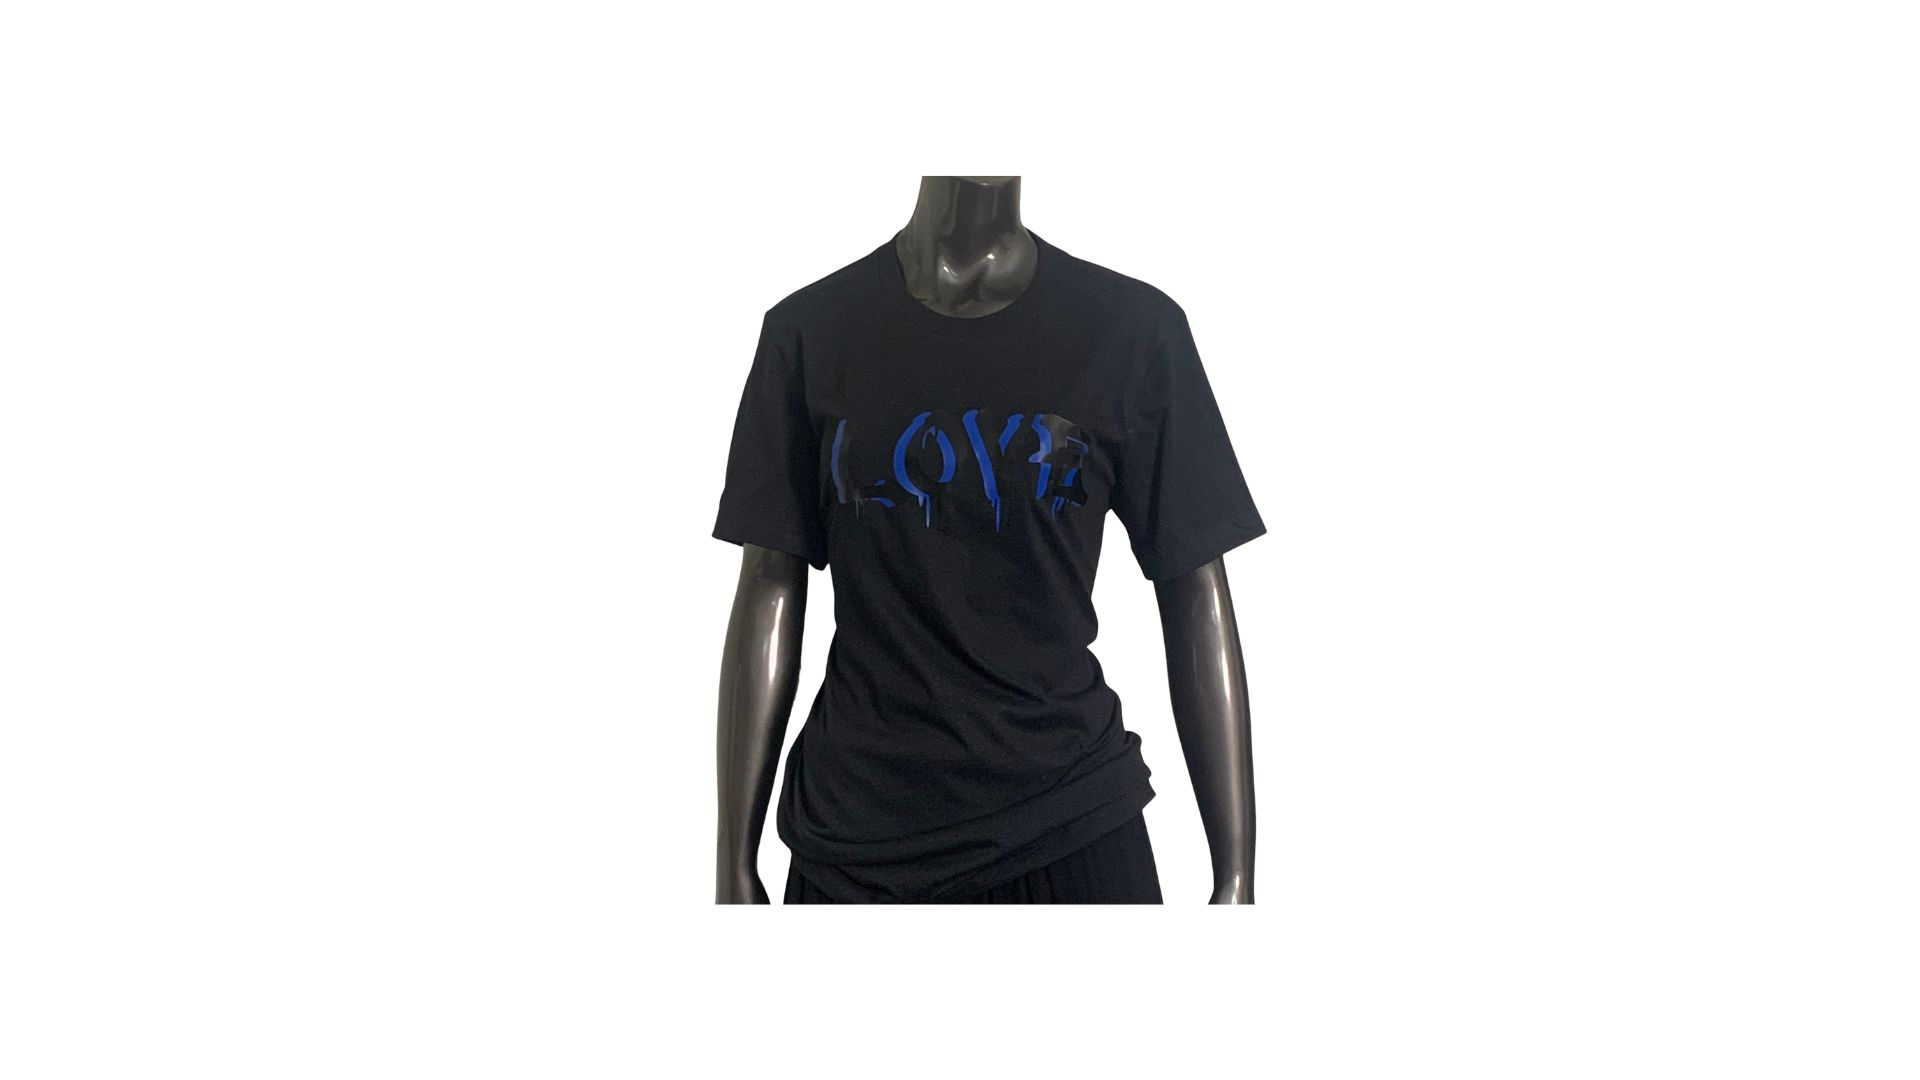 Tee Shirts
<div style="text-align: center;"><em><strong>All our tees in one place!</strong></em></div>

Le' Diva Boutique Store